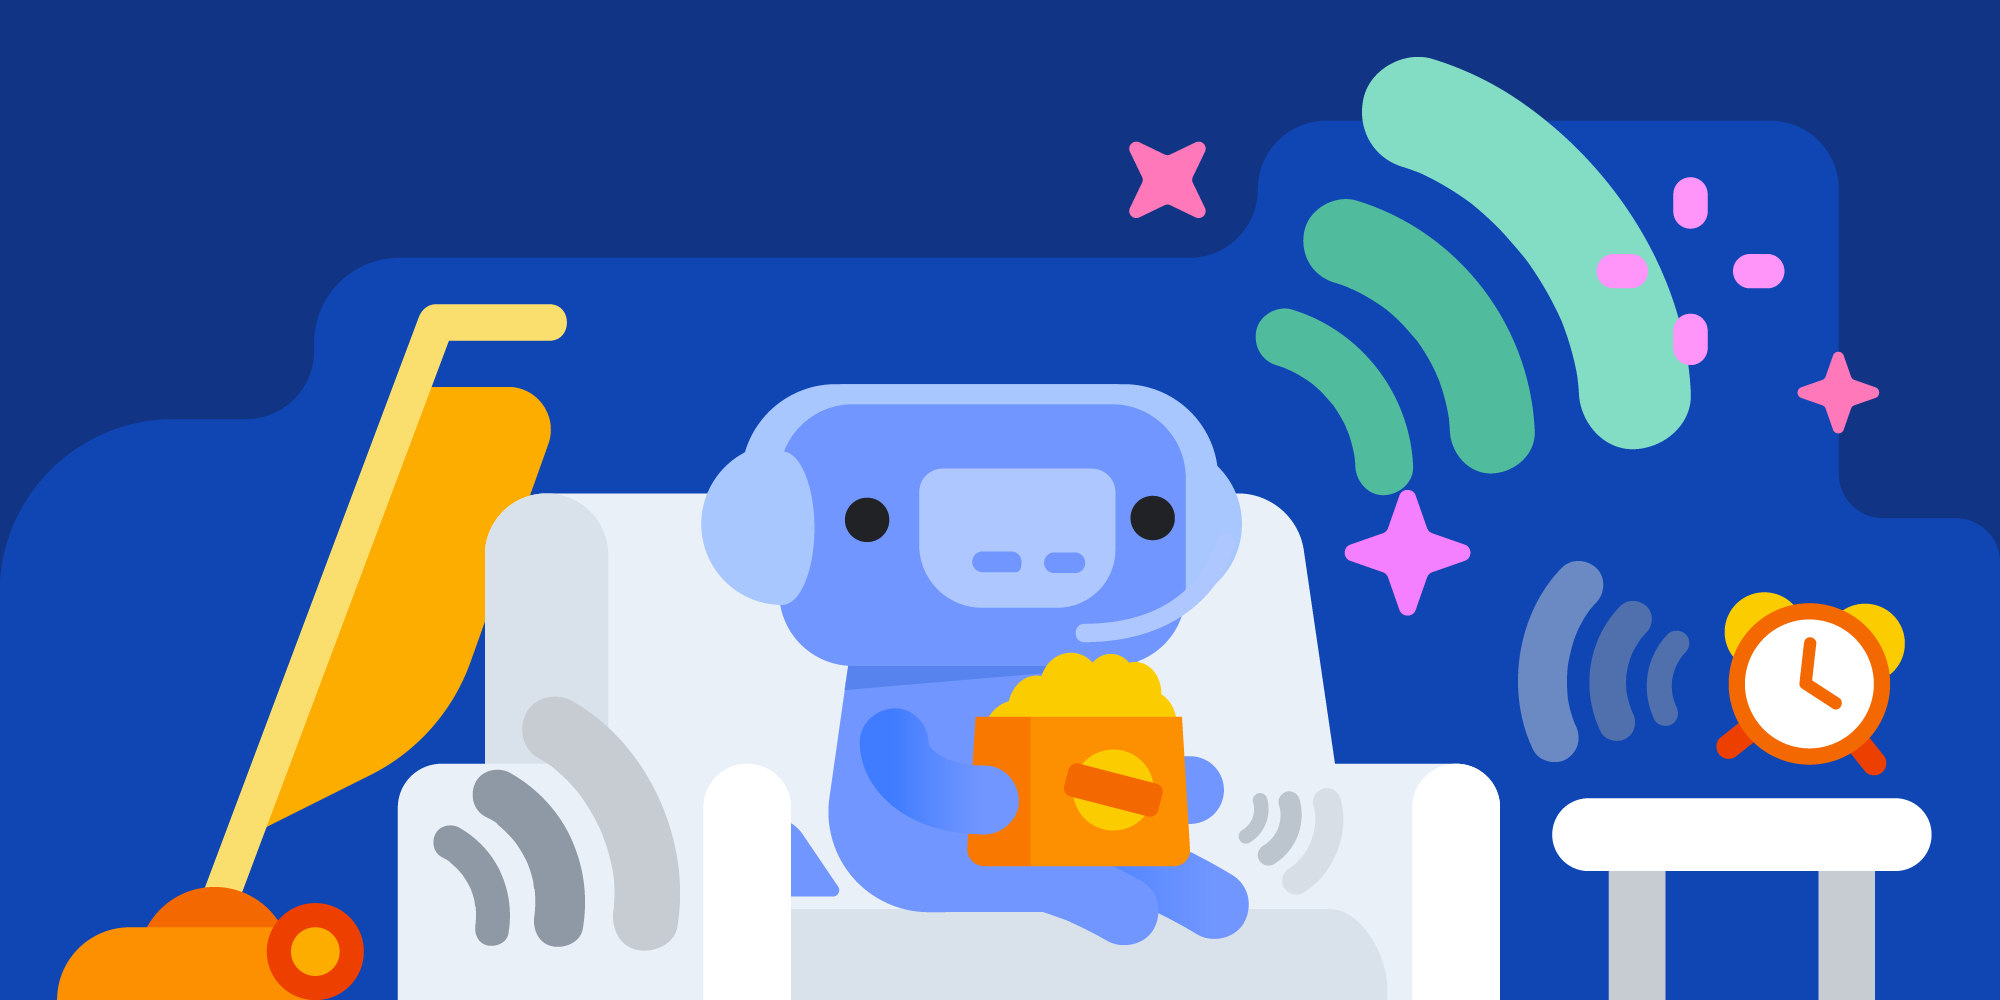 Discord mutes out Microsoft Teams by bringing background noise supression to calls first - OnMSFT.com - April 10, 2020